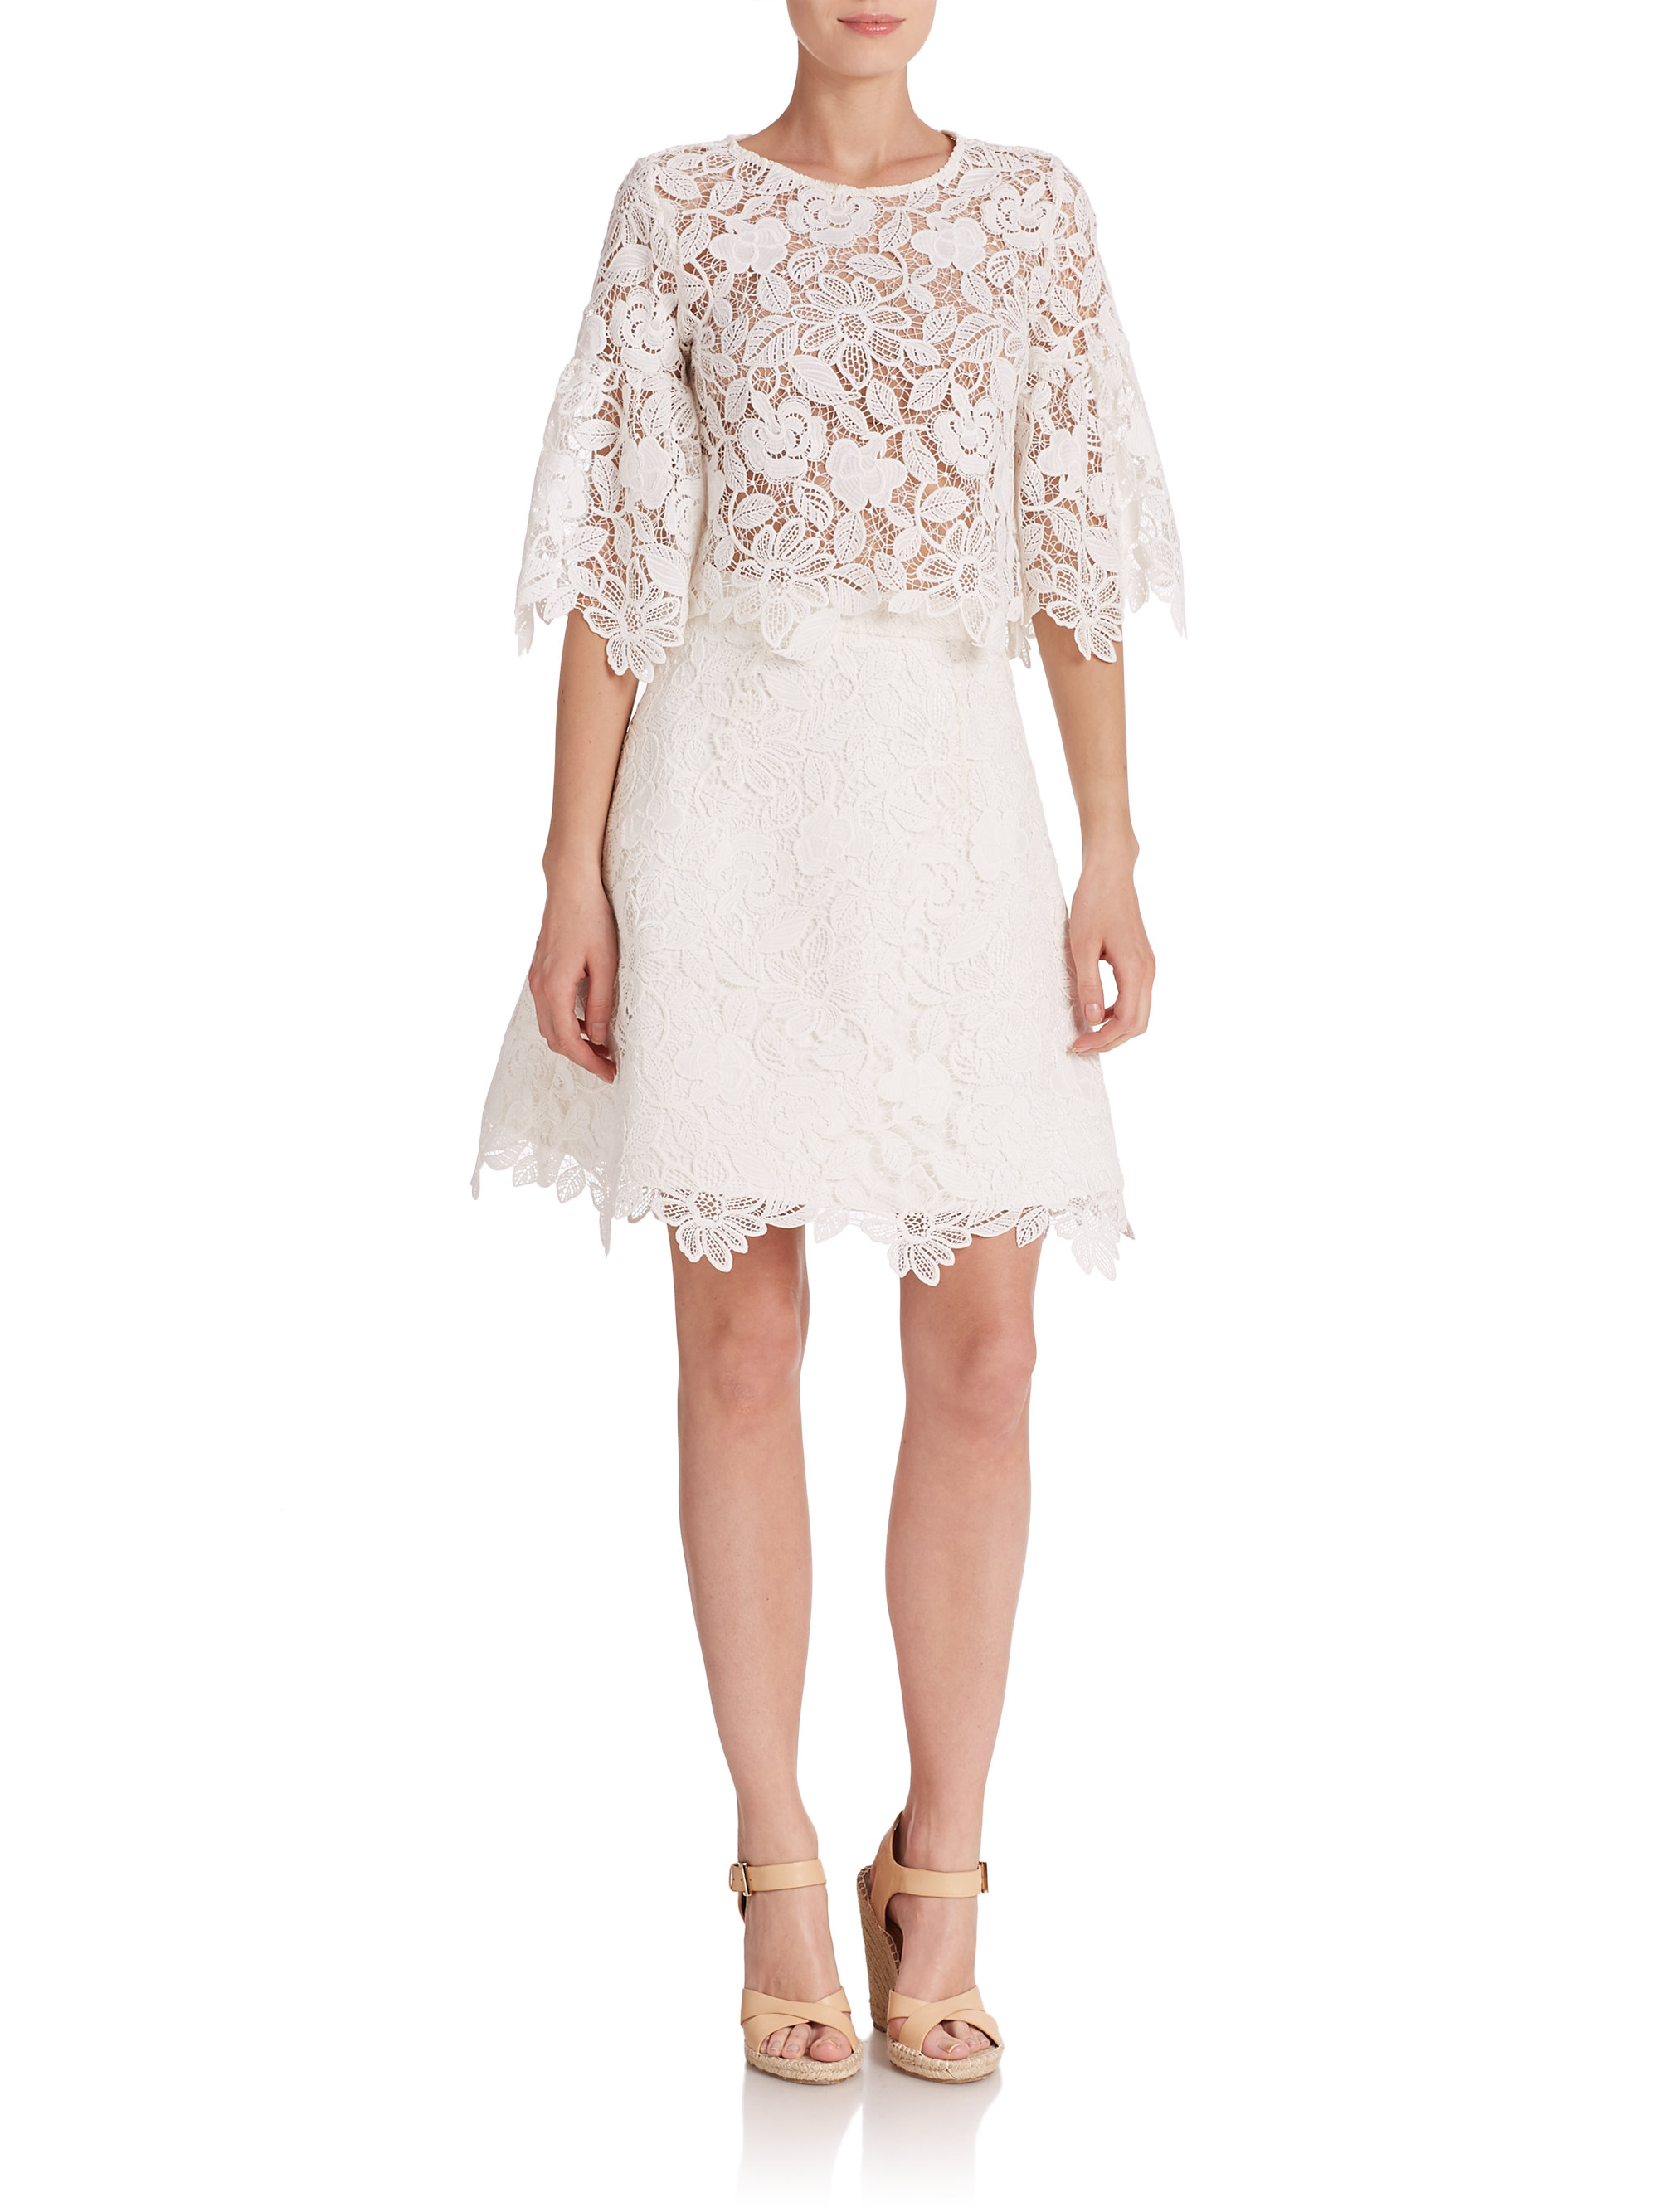 Lyst - Alexis Valery Lace Bell-Sleeve Cropped Top in White